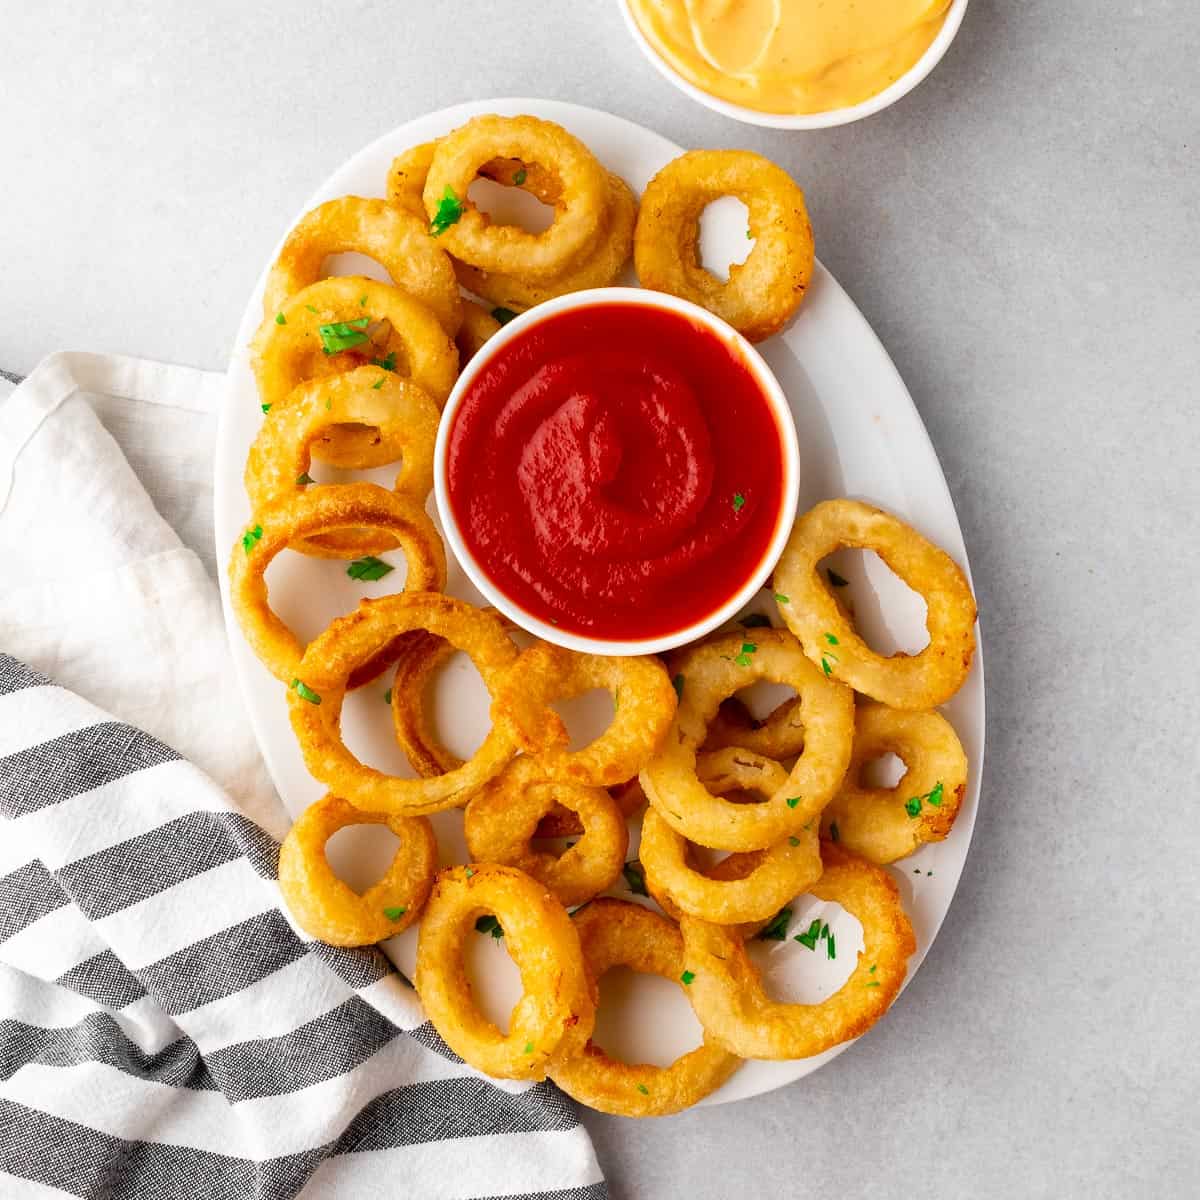 https://frommypantry.com/wp-content/uploads/2022/08/air-fryer-frozen-onion-rings-featured.jpg